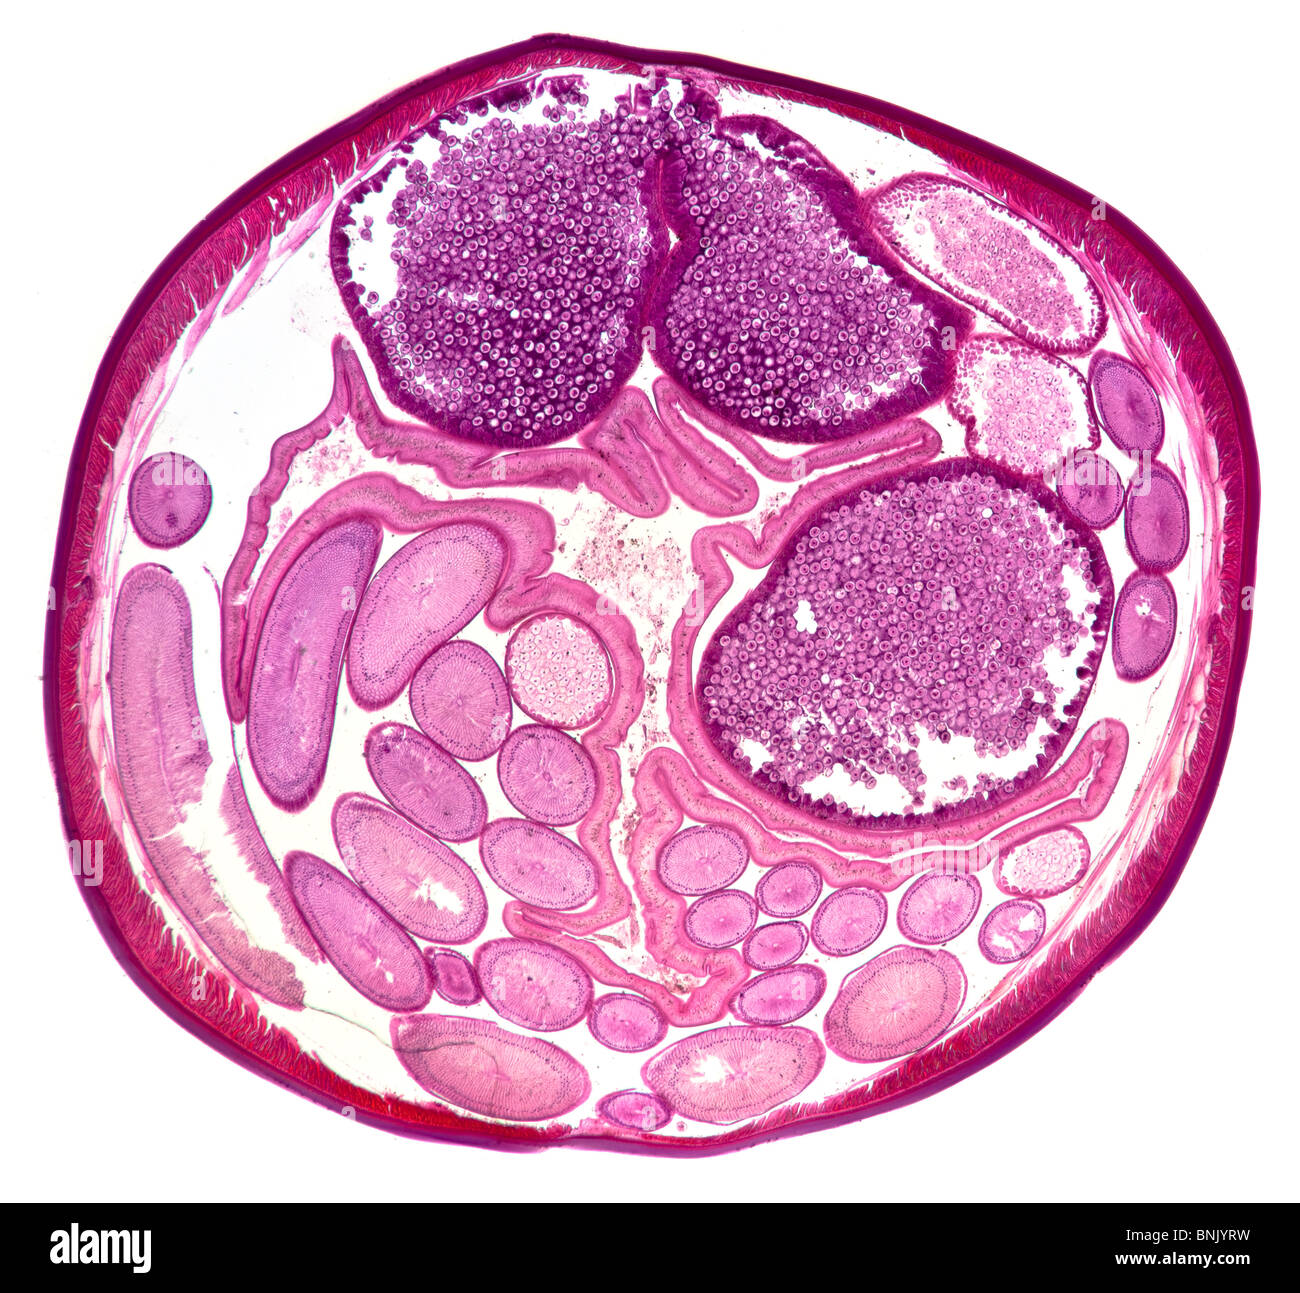 Photomicrograph of a section of Acaris sp. parasitic nematode worm (female) Stock Photo